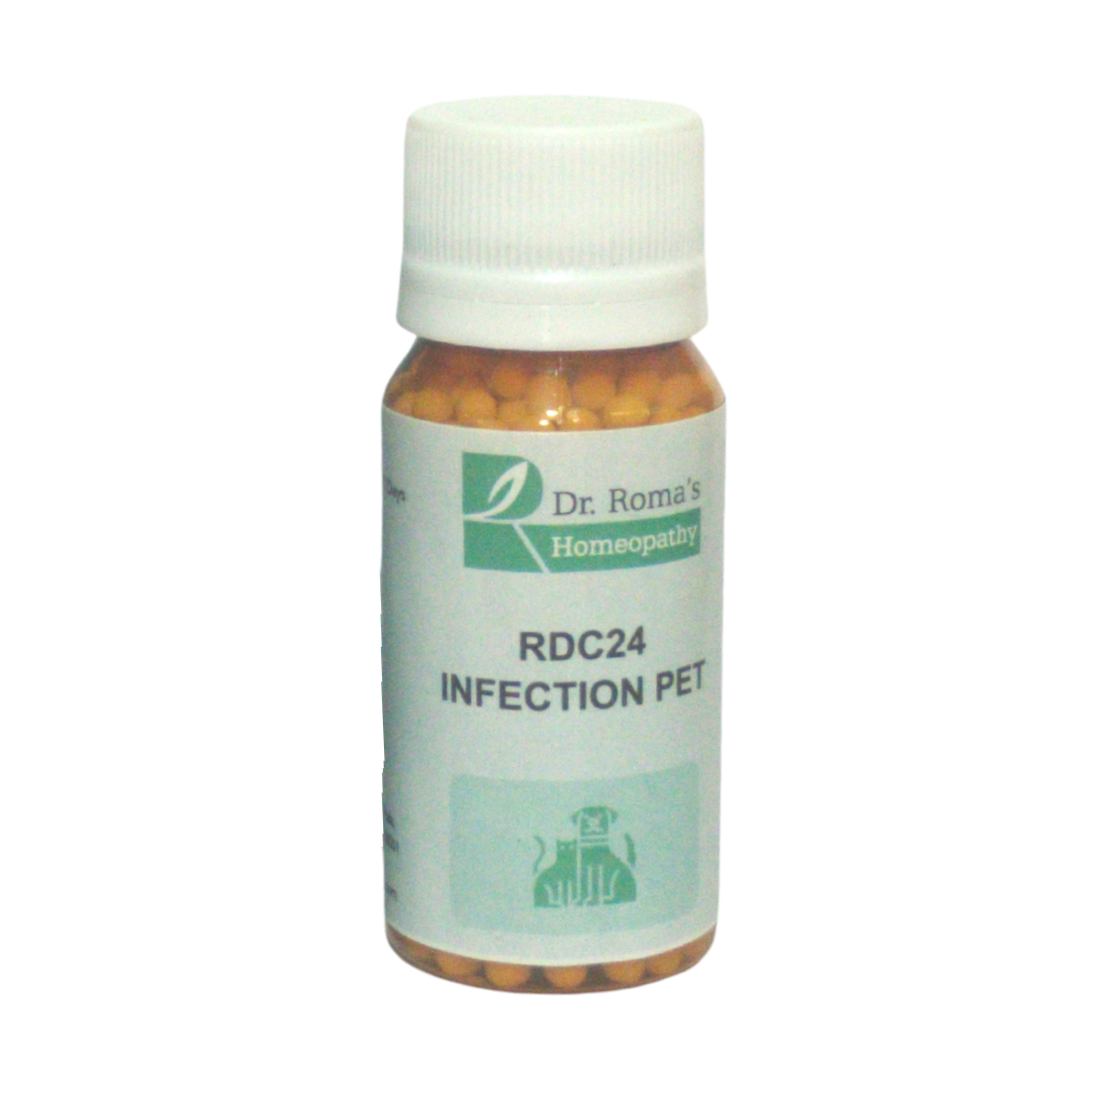 INFECTION PET for INFECTION - RDC 24